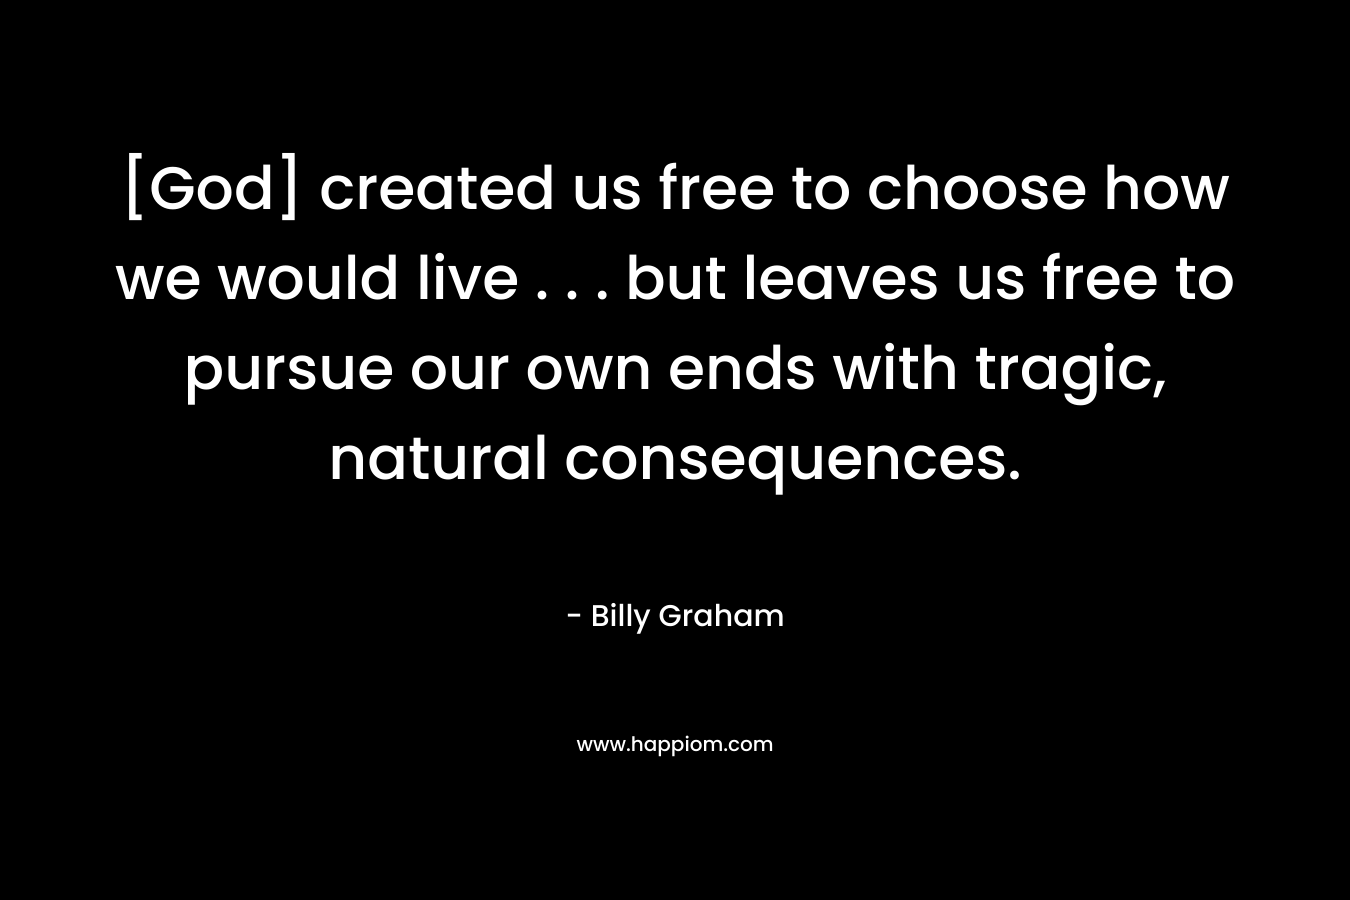 [God] created us free to choose how we would live . . . but leaves us free to pursue our own ends with tragic, natural consequences.